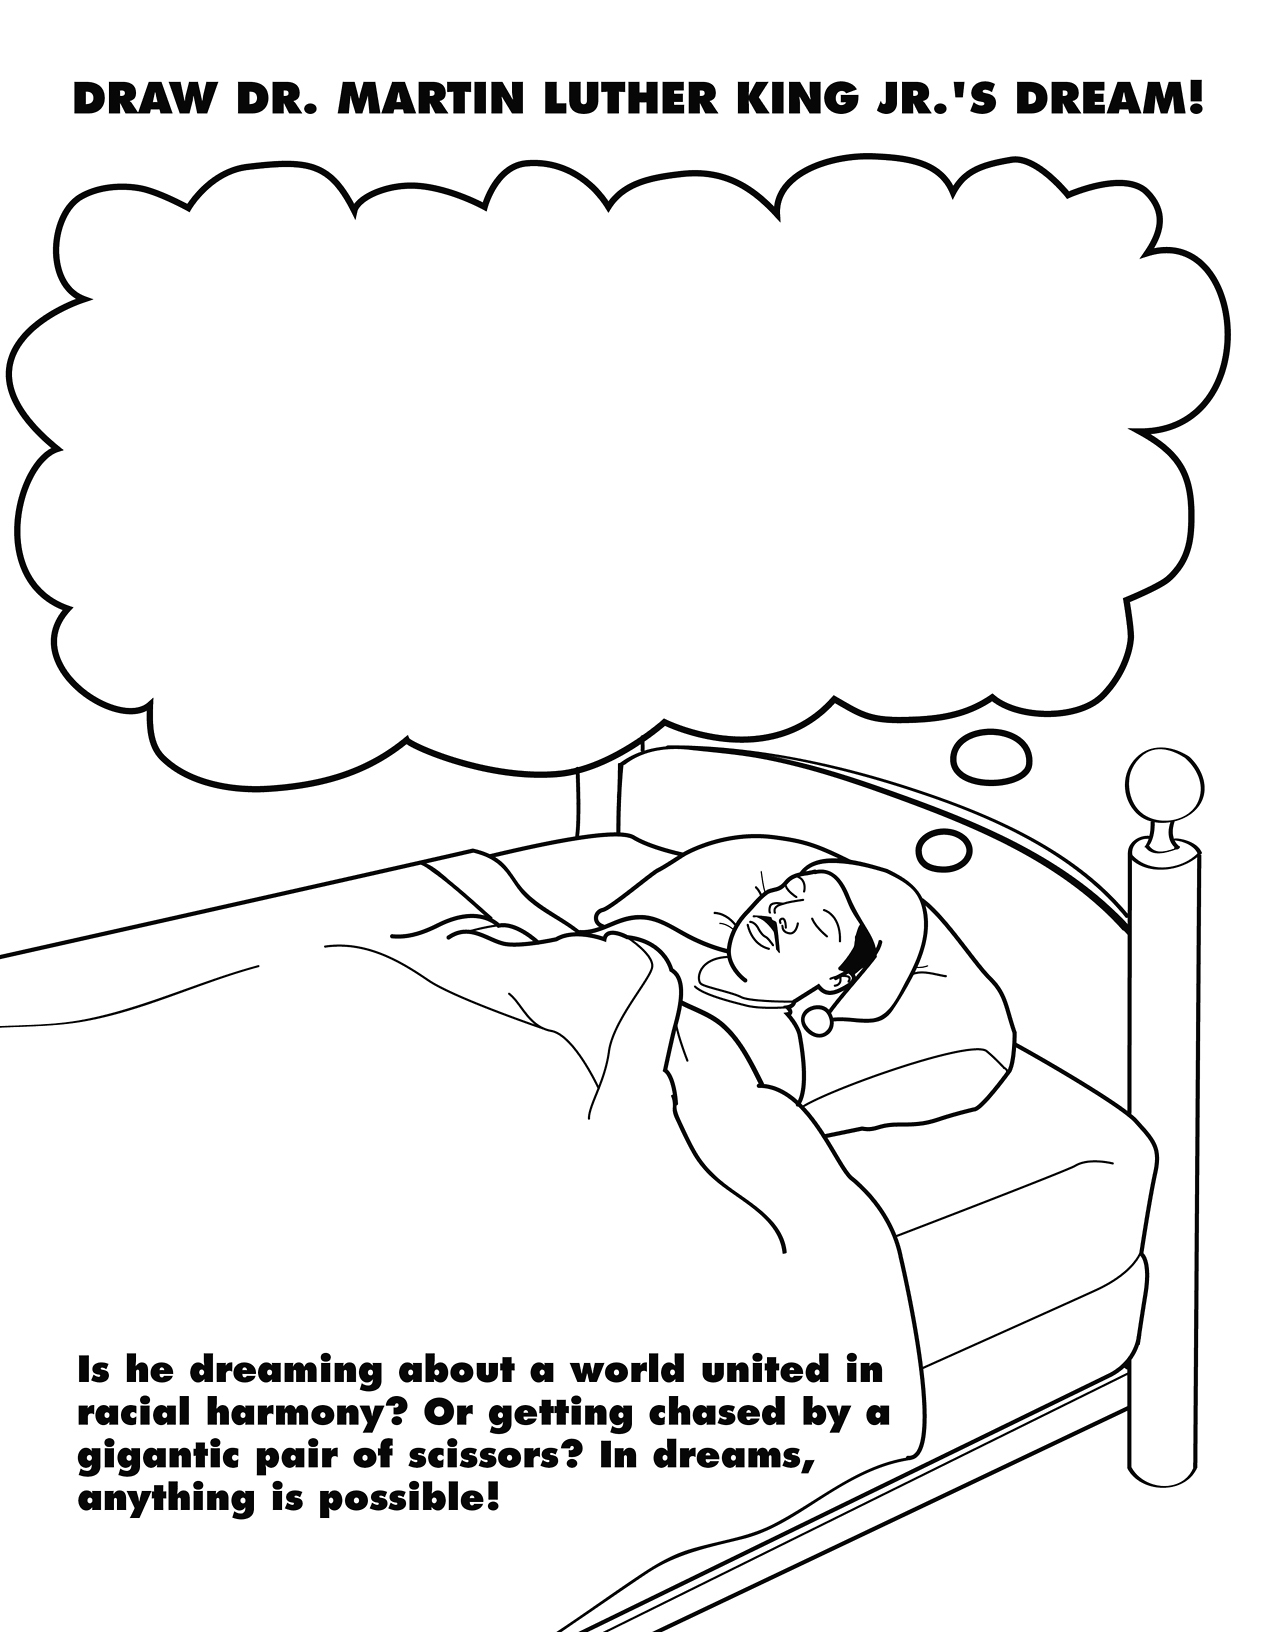 procrastination coloring pages - Draw Dr. Martin Luther King Jr.'S Dream! Is he dreaming about a world united in racial harmony? Or getting chased by a gigantic pair of scissors? In dreams, anything is possible!